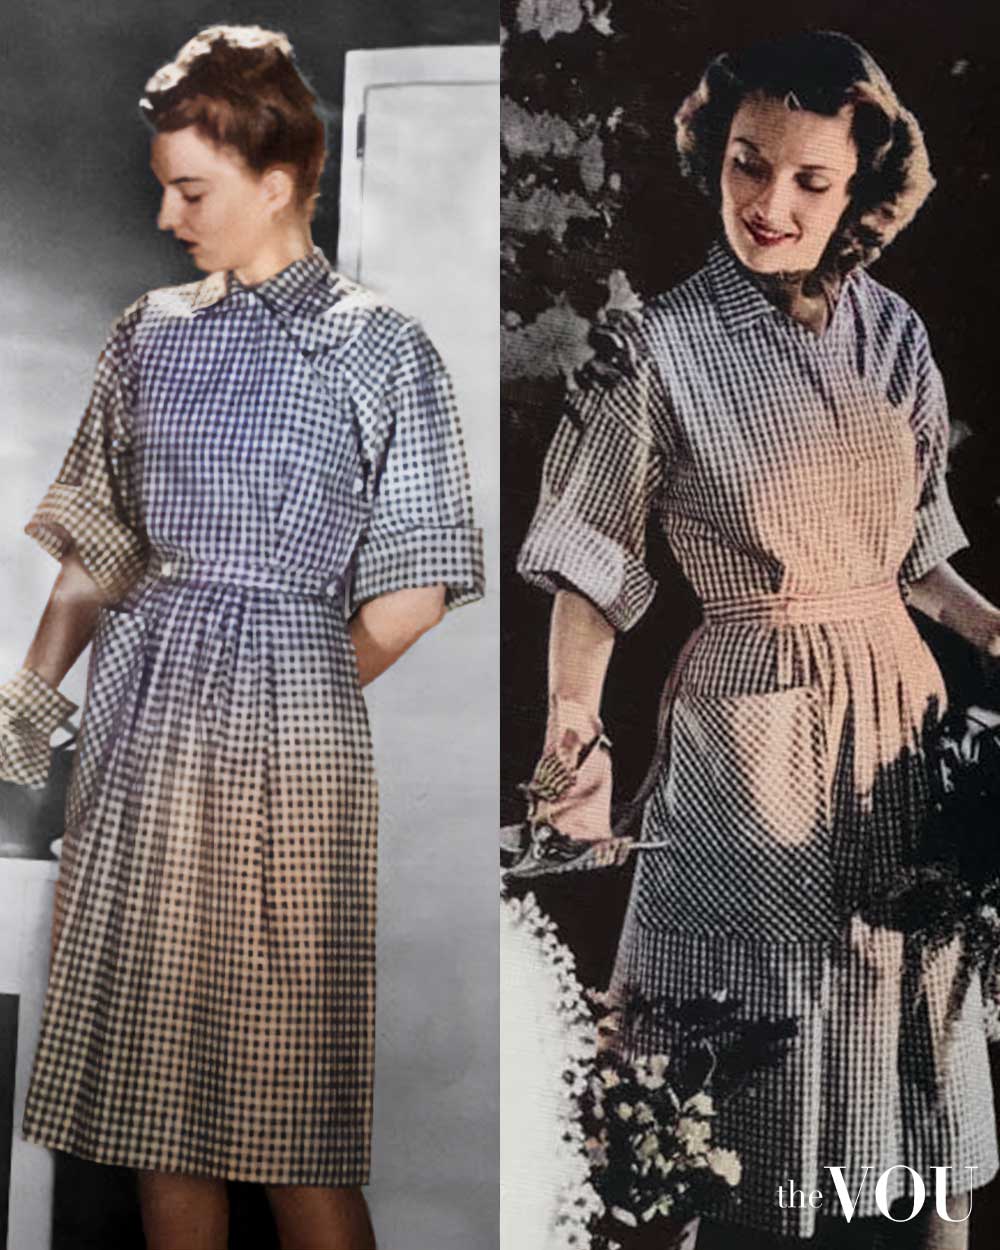 The Popover Dress in the 1940s fashion